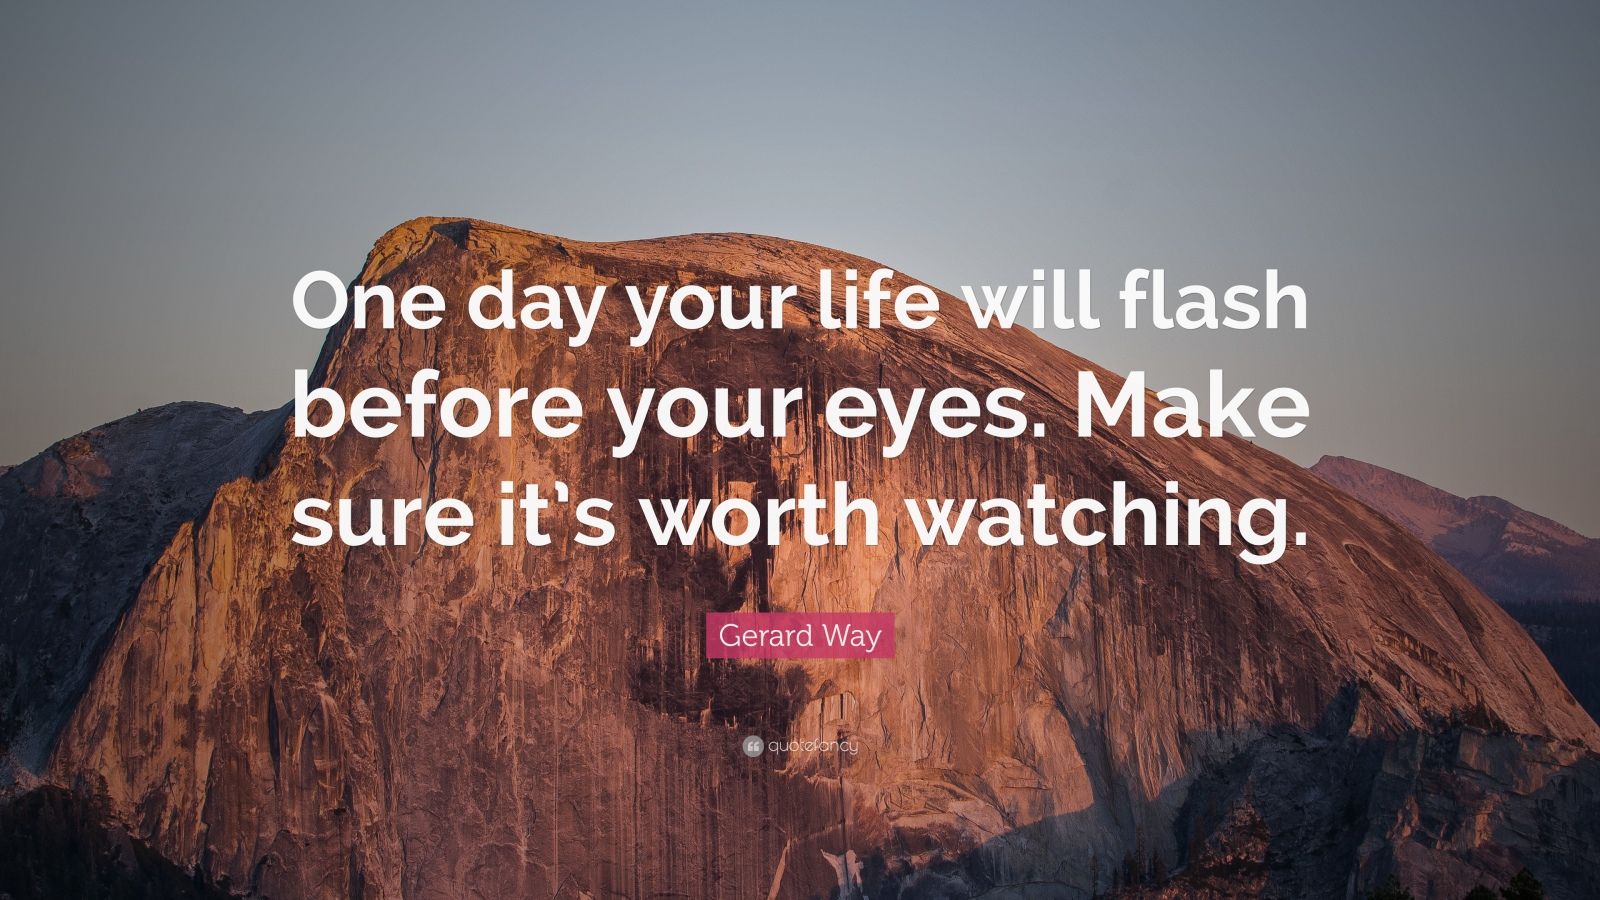 1703512 Gerard Way Quote One day your life will flash before your eyes